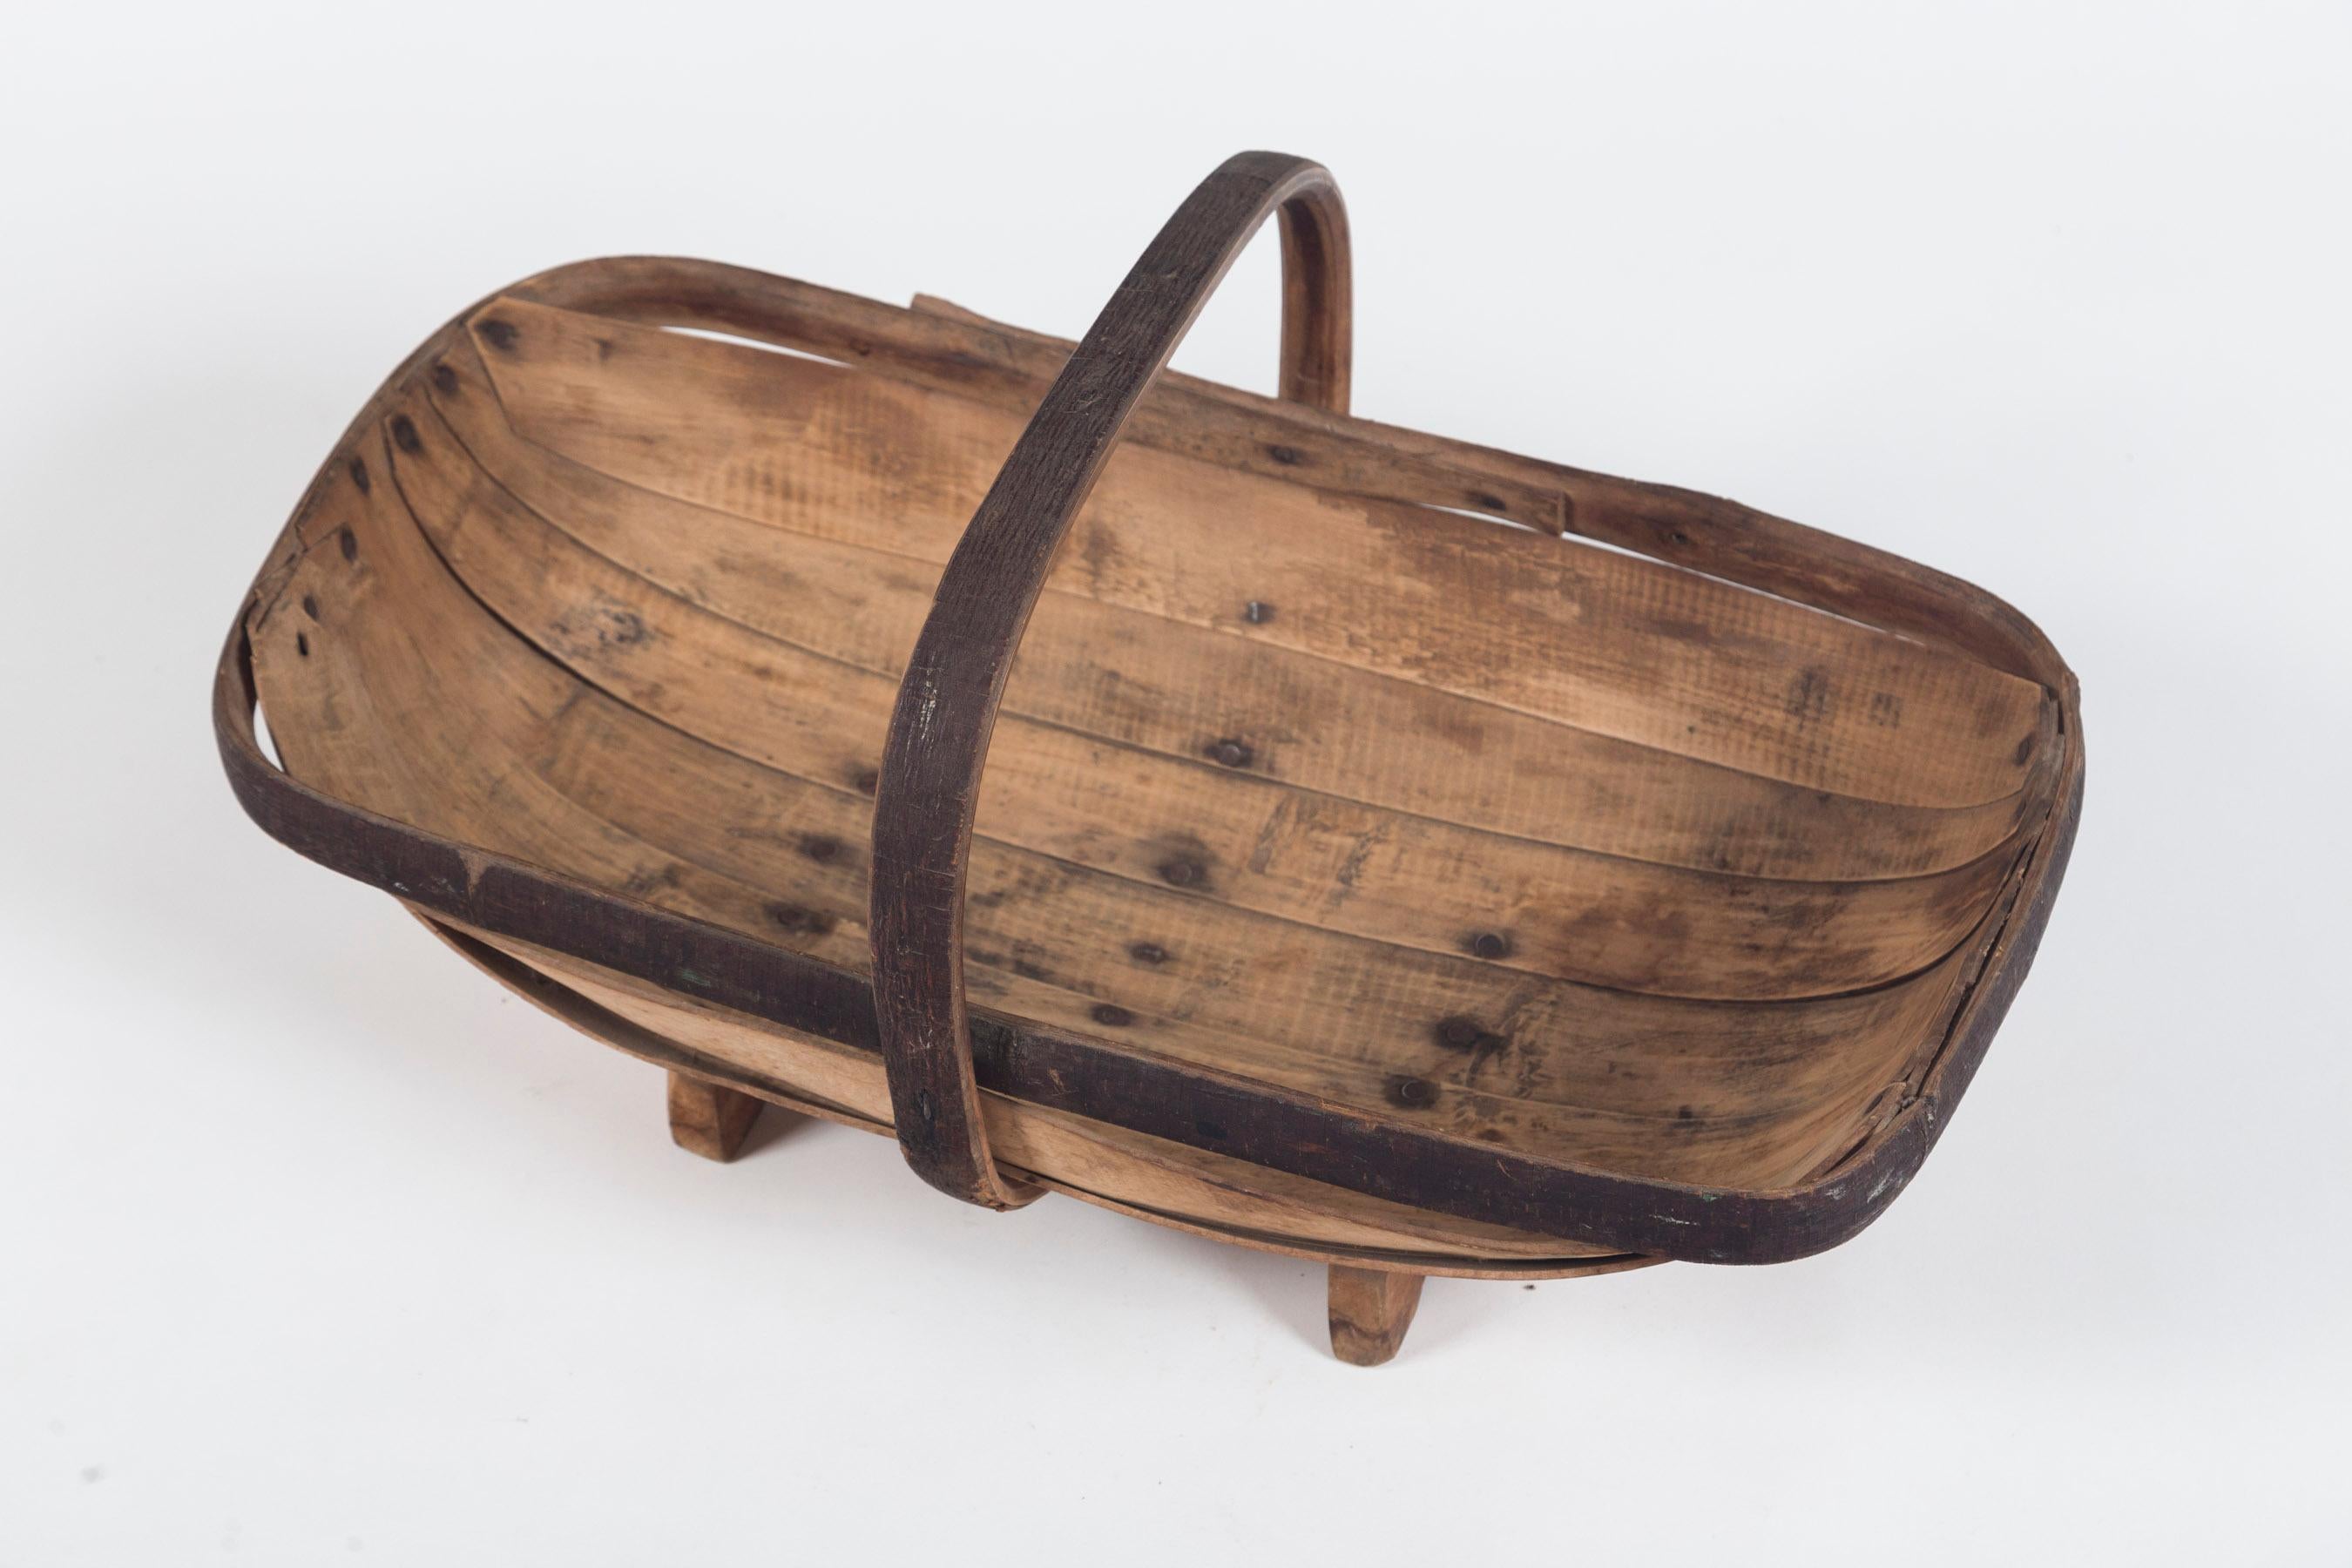 Vintage English garden trug (basket), circa 1930. Traditional Sussex oblong shape, bentwood construction. Trugs were designed to gather flowers and herbs from the garden. Lovely aged wood surface.